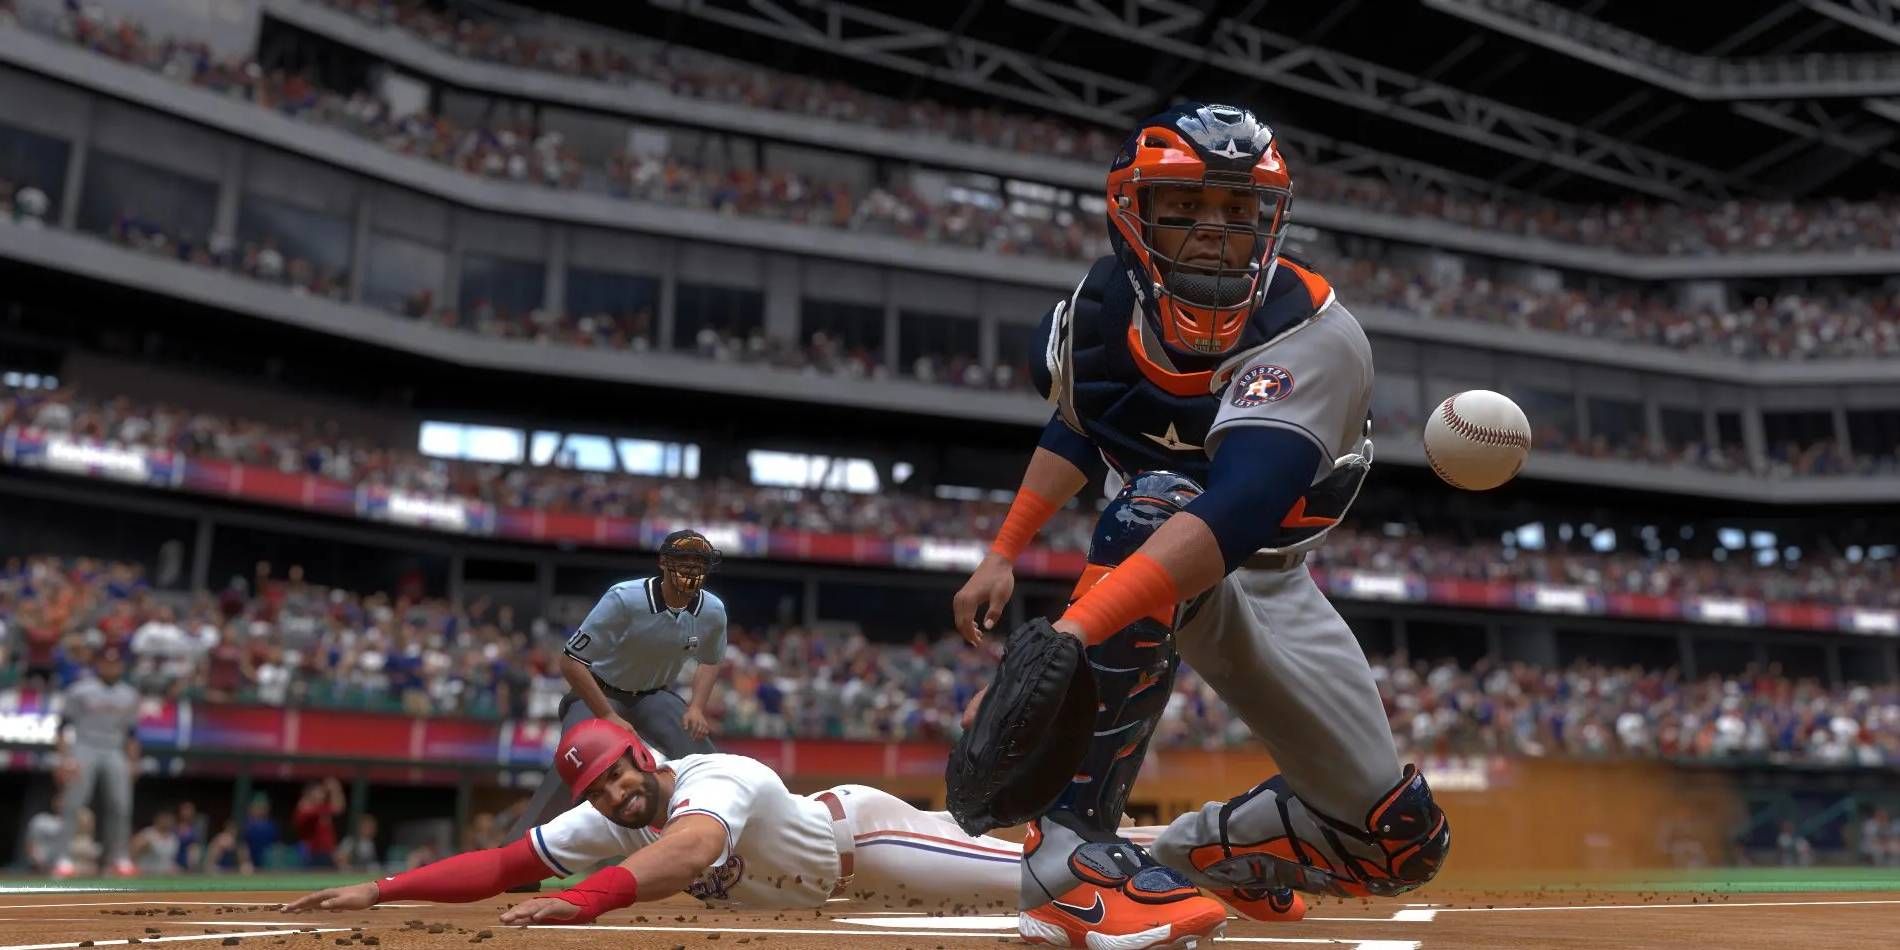 MLB The Show 23 Catcher Getting Ball to Tag Out Runner Who is Safe After Reaching Home Plate